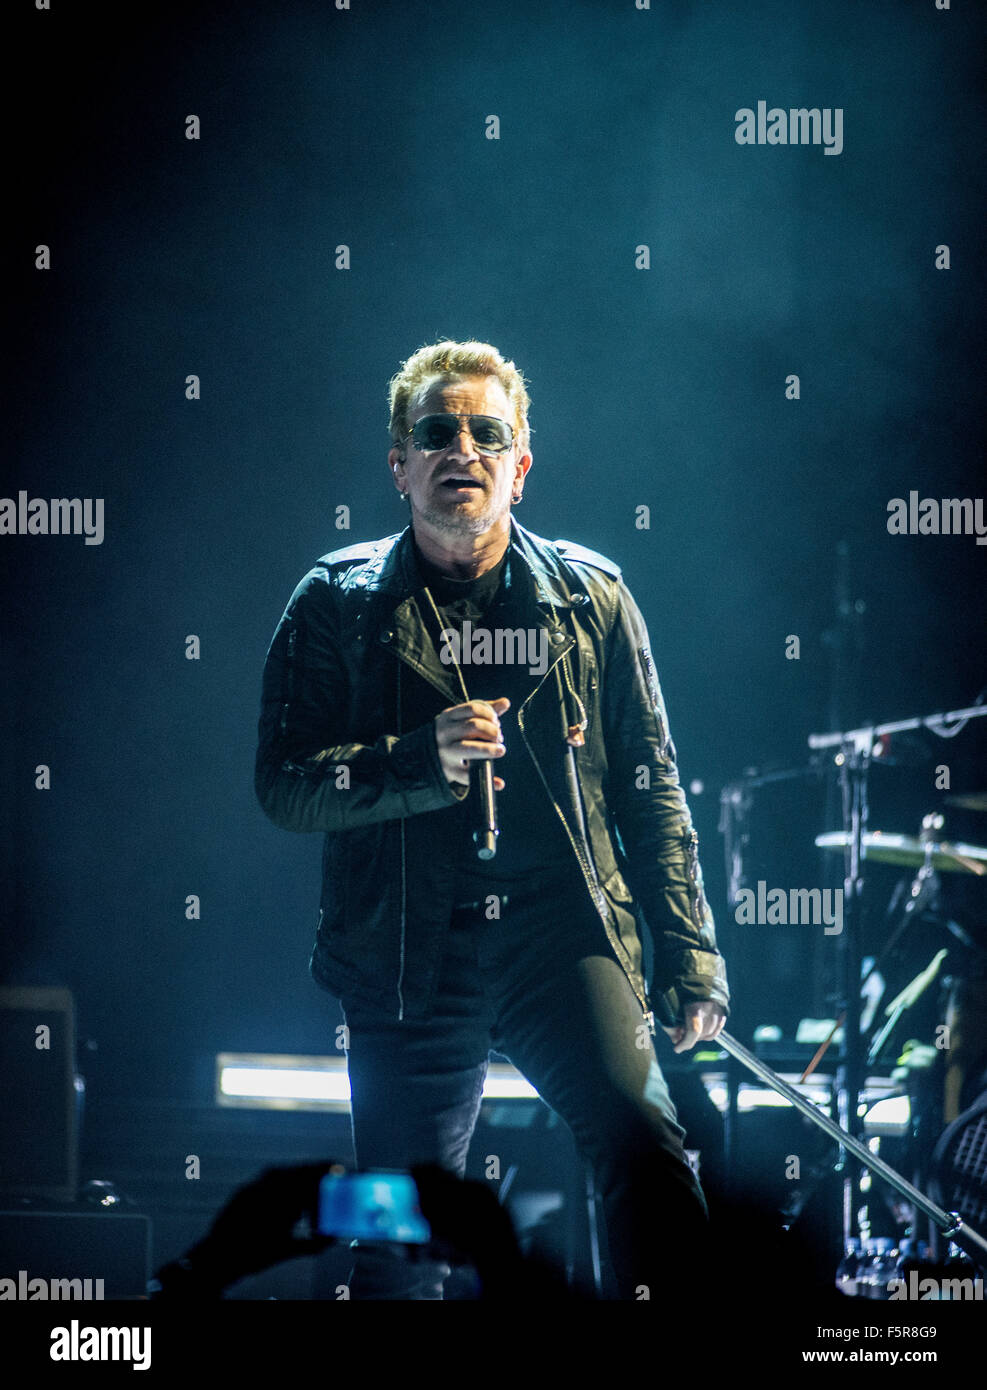 Bono of U2 performs at the SSE Hydro as part of their iNNOCENCE + eXPERIENCE tour on November 6, 2015 in Glasgow, Scotland. Stock Photo